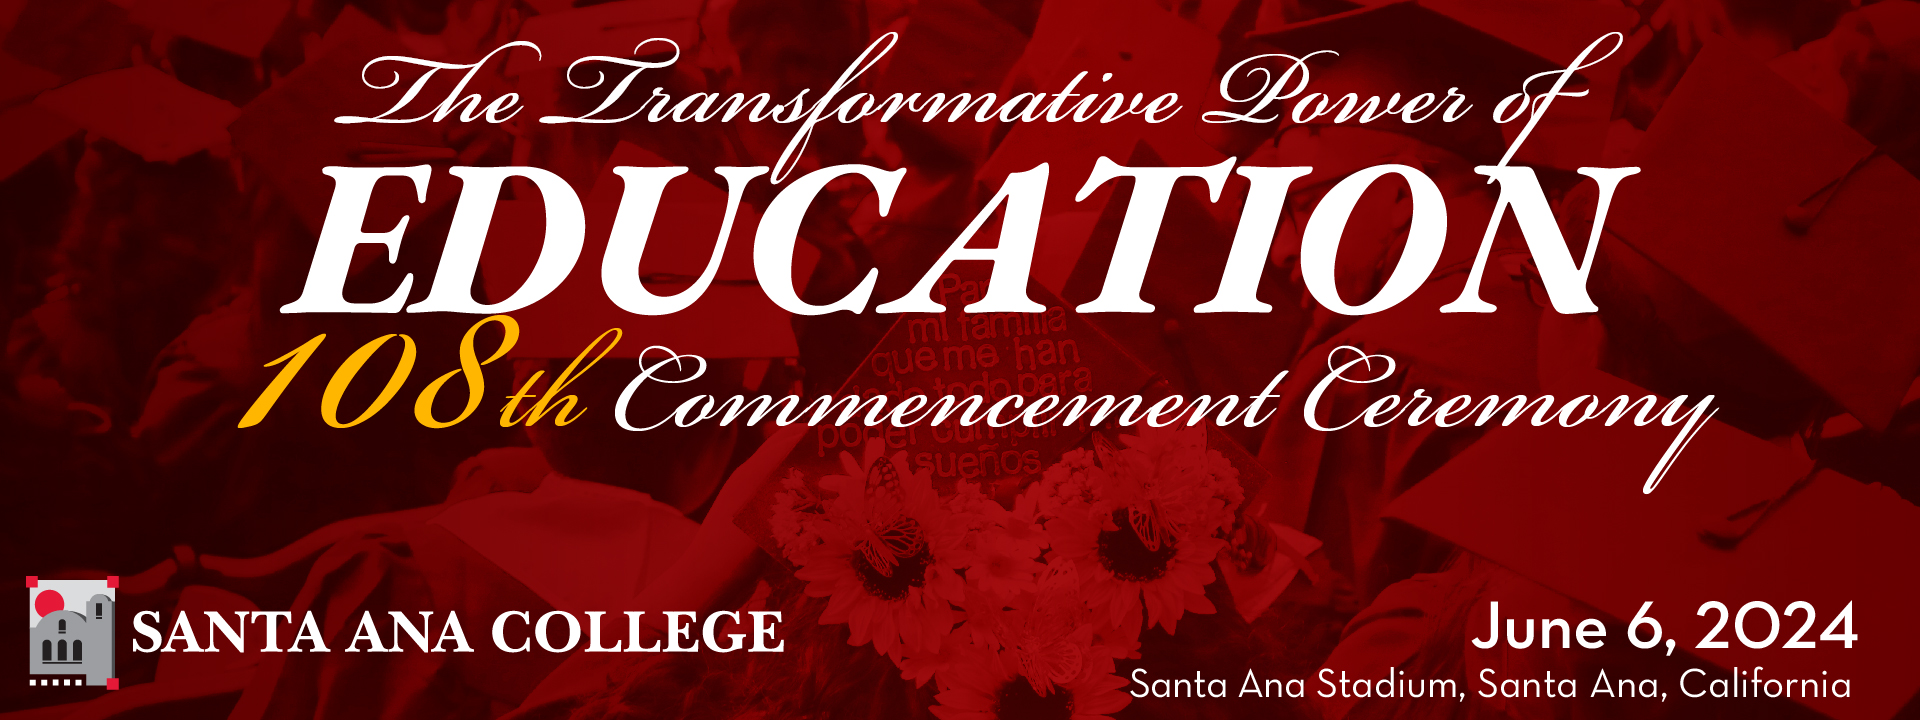 The transformative power of education. 108th commencement ceremony